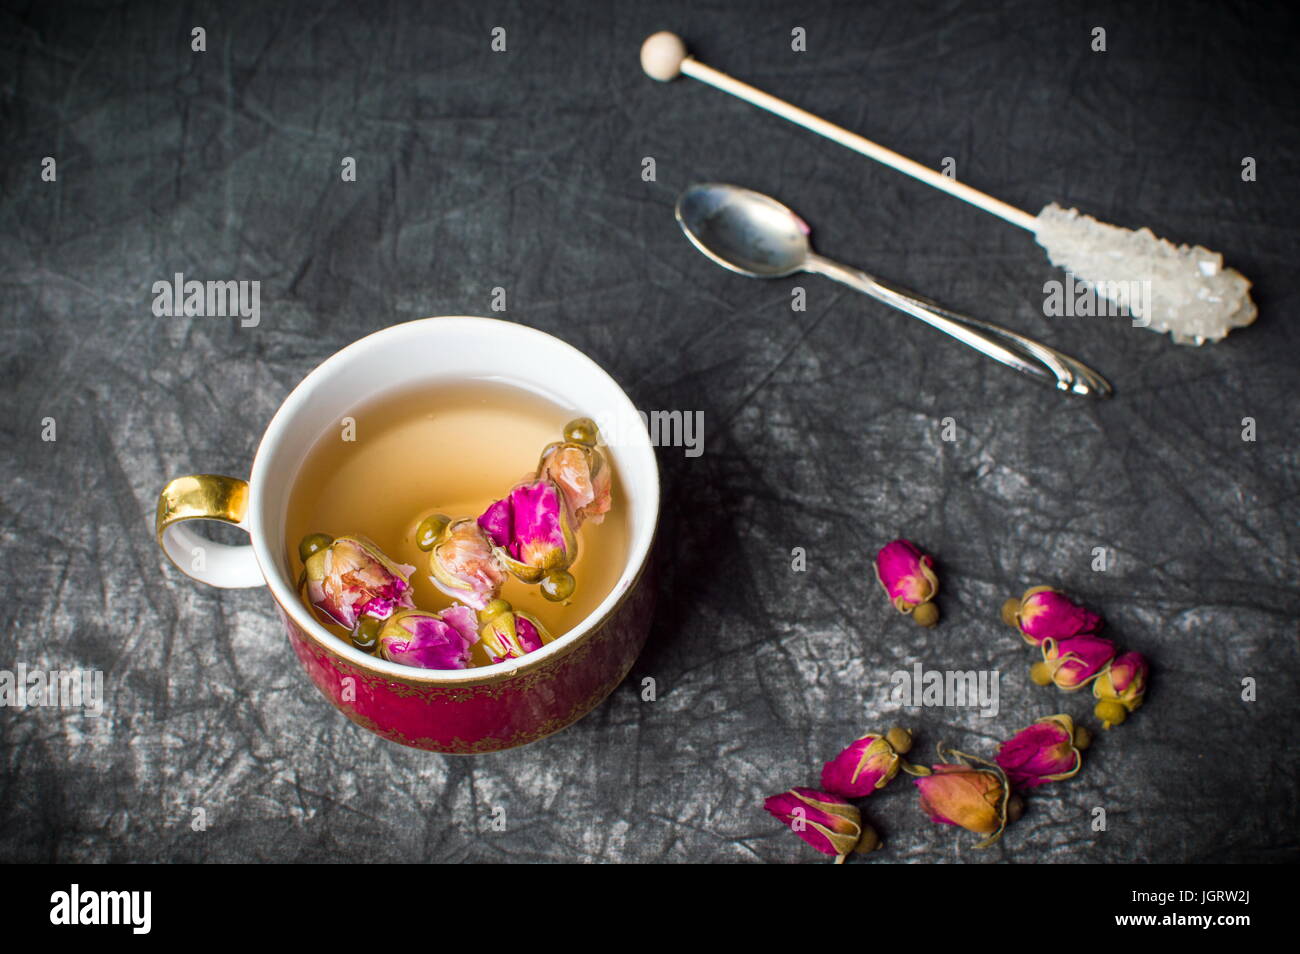 Rose tea in red cup on dark fabric Stock Photo